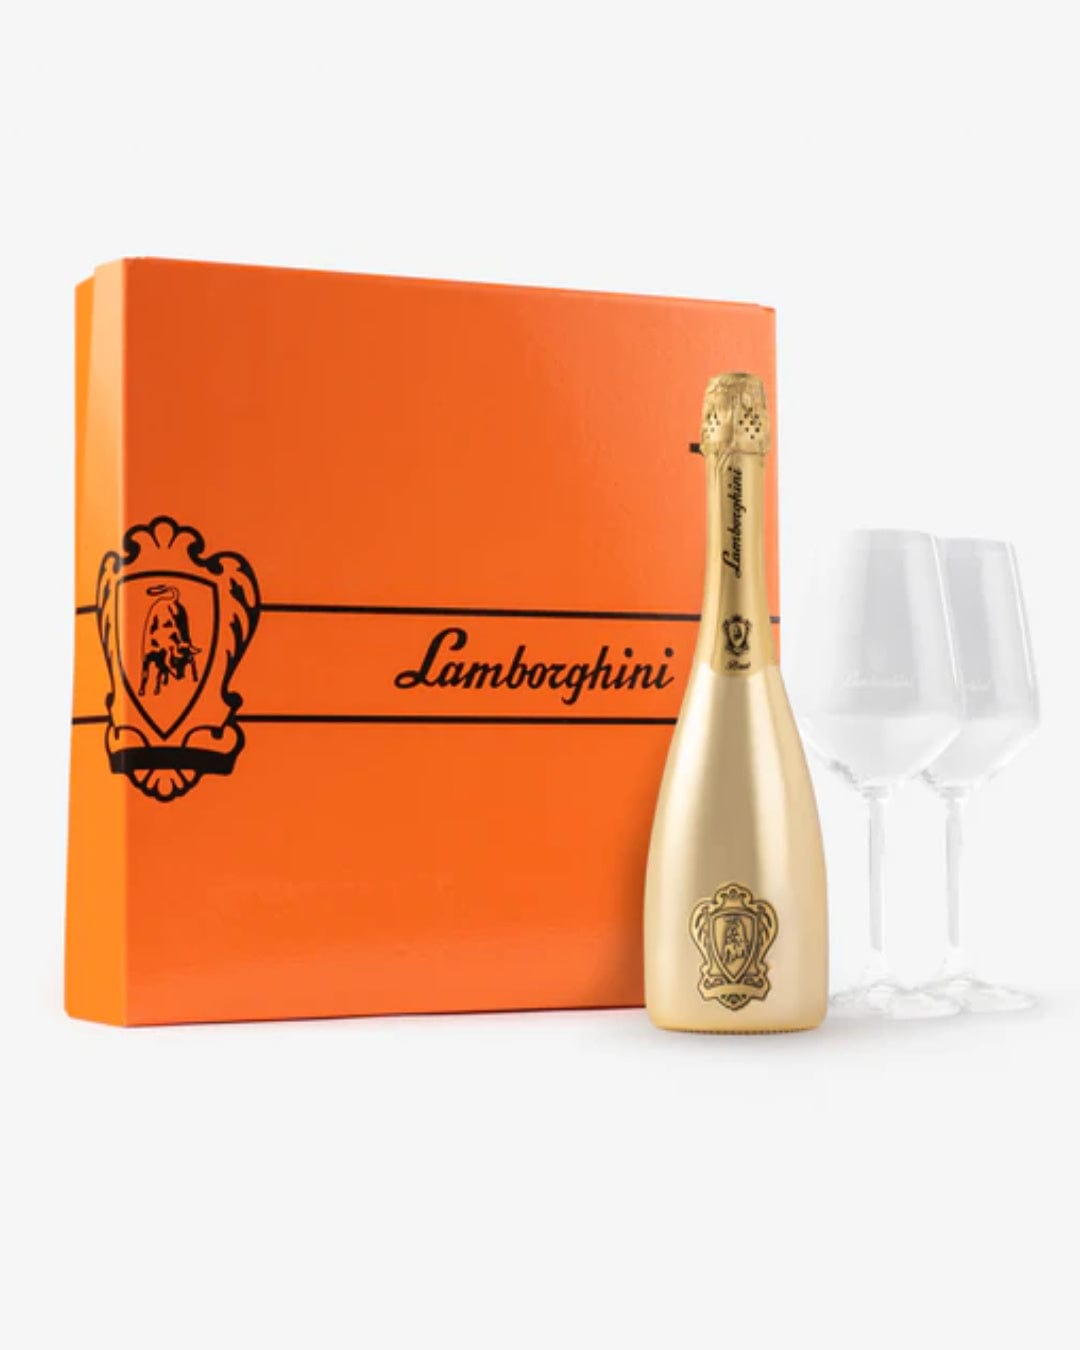 Lamborghini Gold Brut Sparkling Wine Gift Set With 2 Crystal Glasses, 75 cl